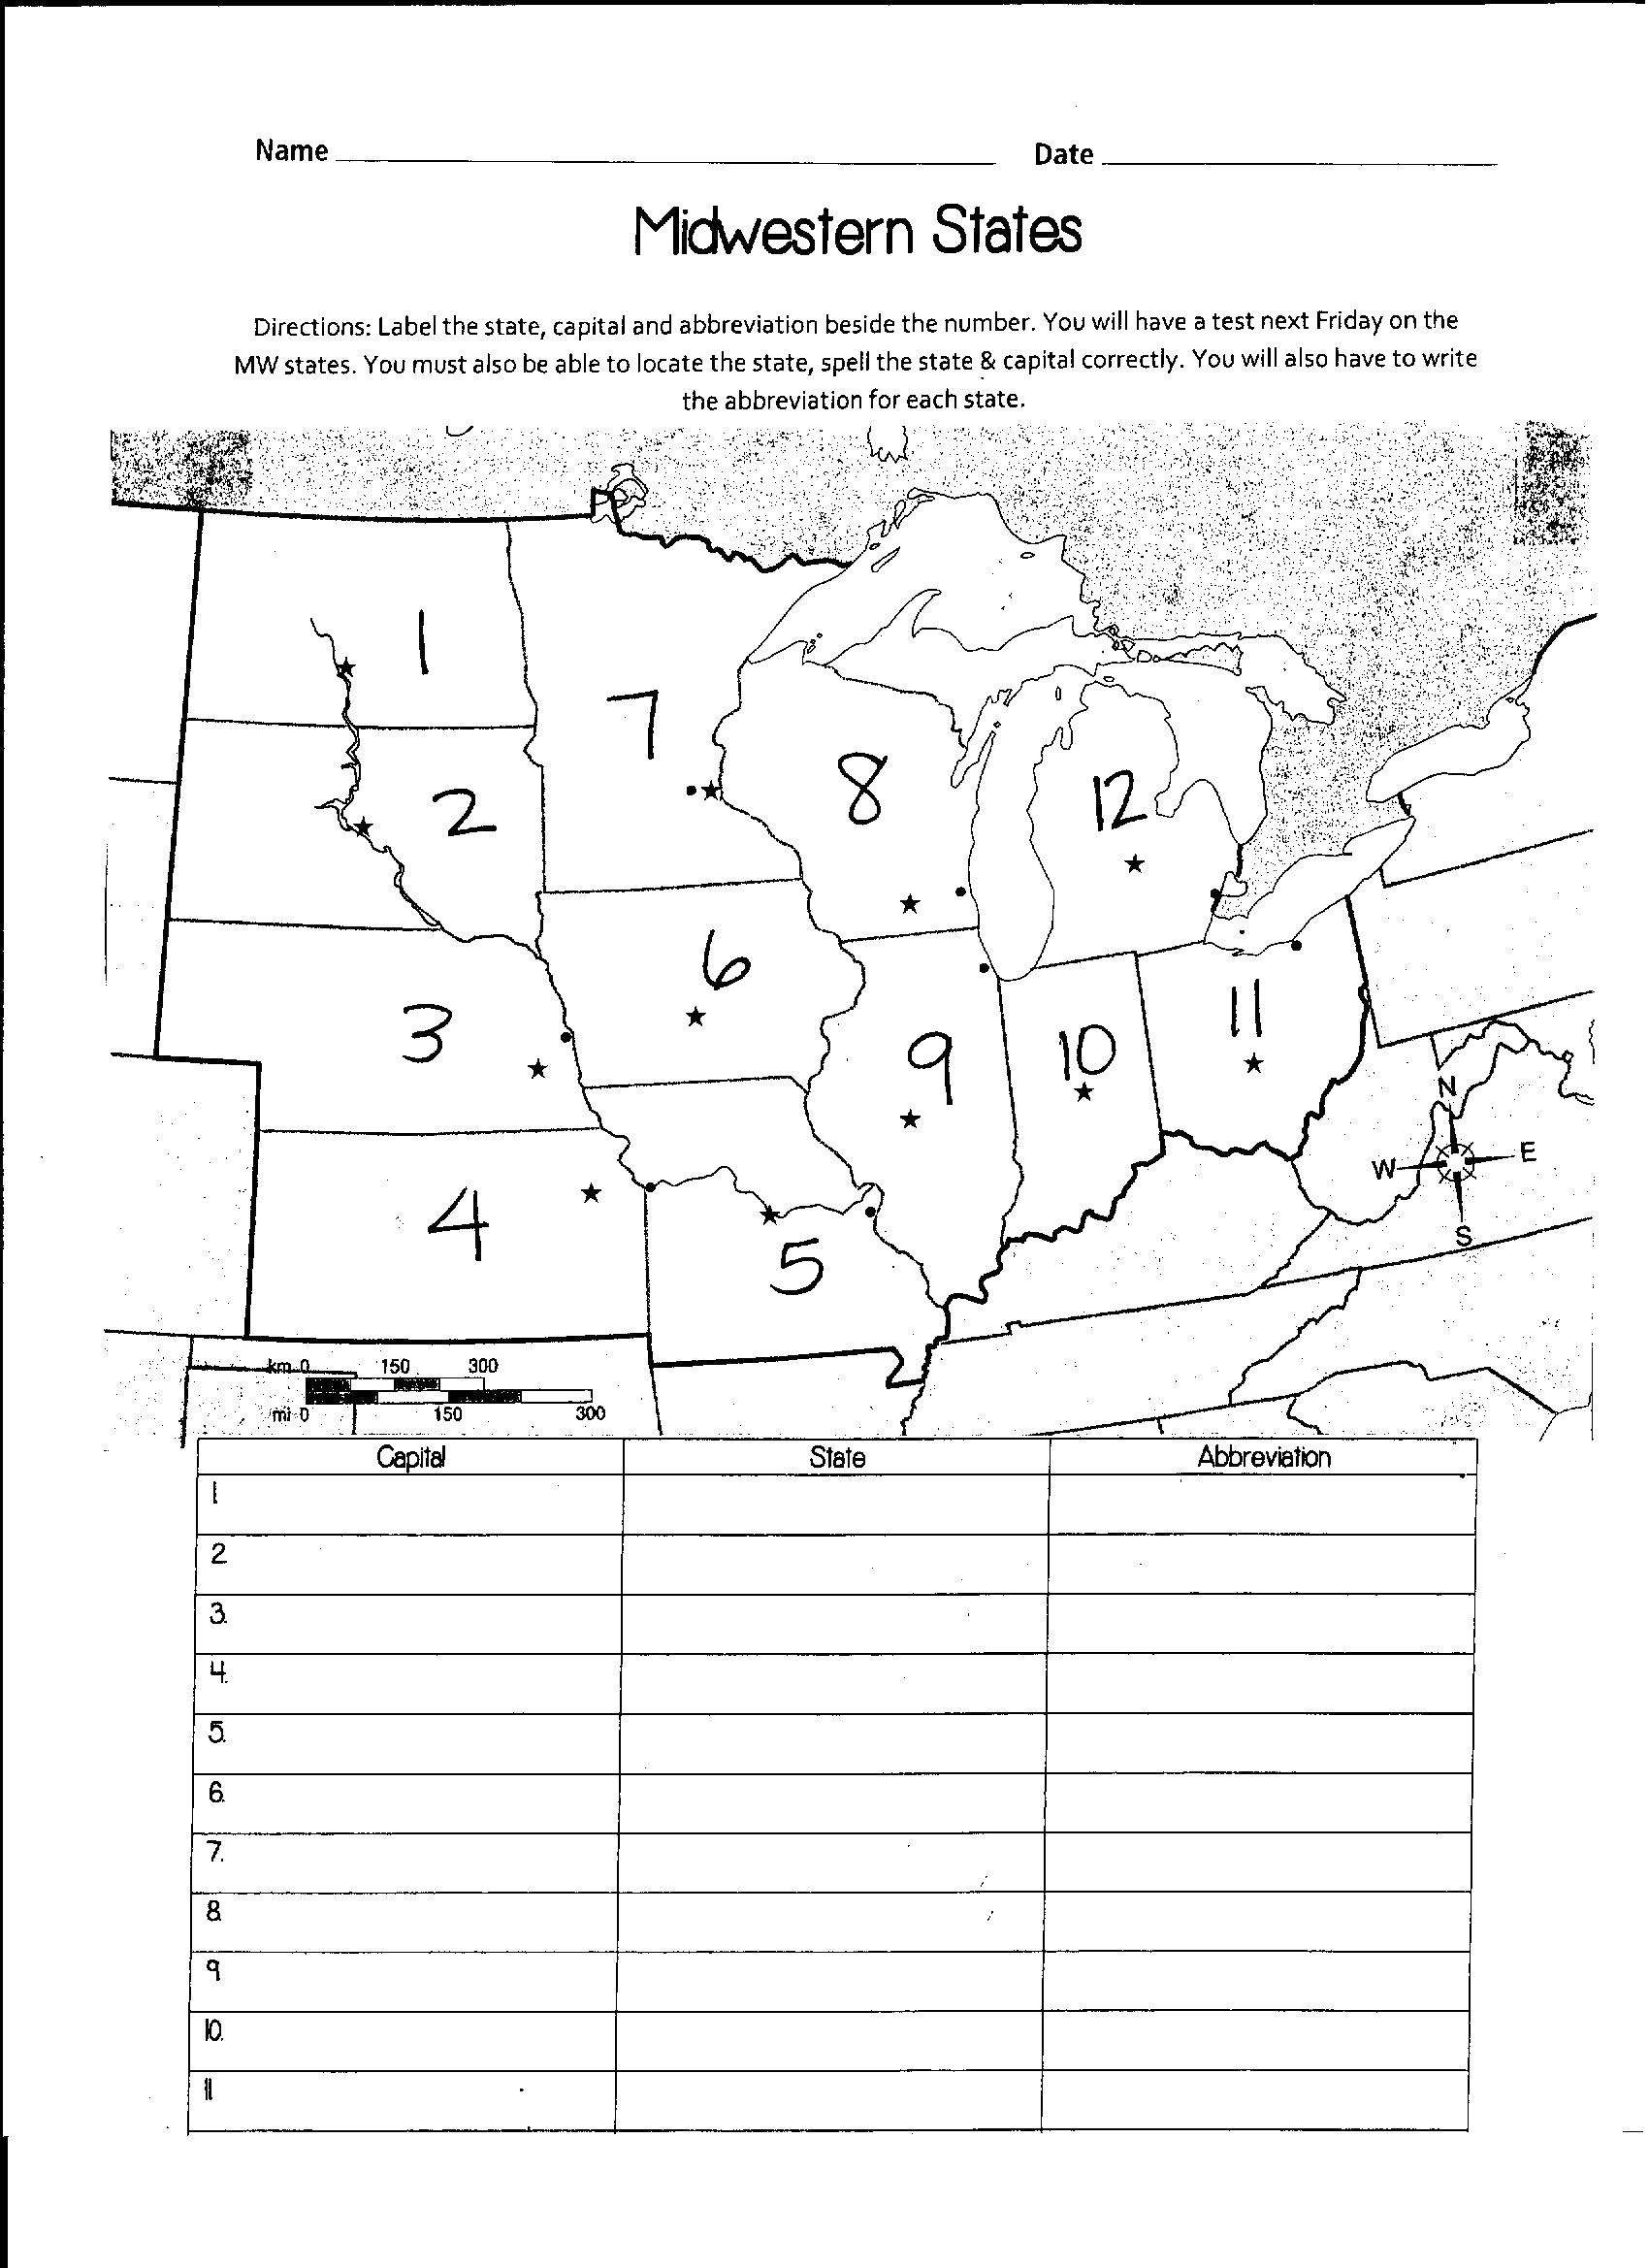 Us Midwest Region Map Blank Labelmidwest.gif Awesome Midwest Region - States And Capitals Map Quiz Printable